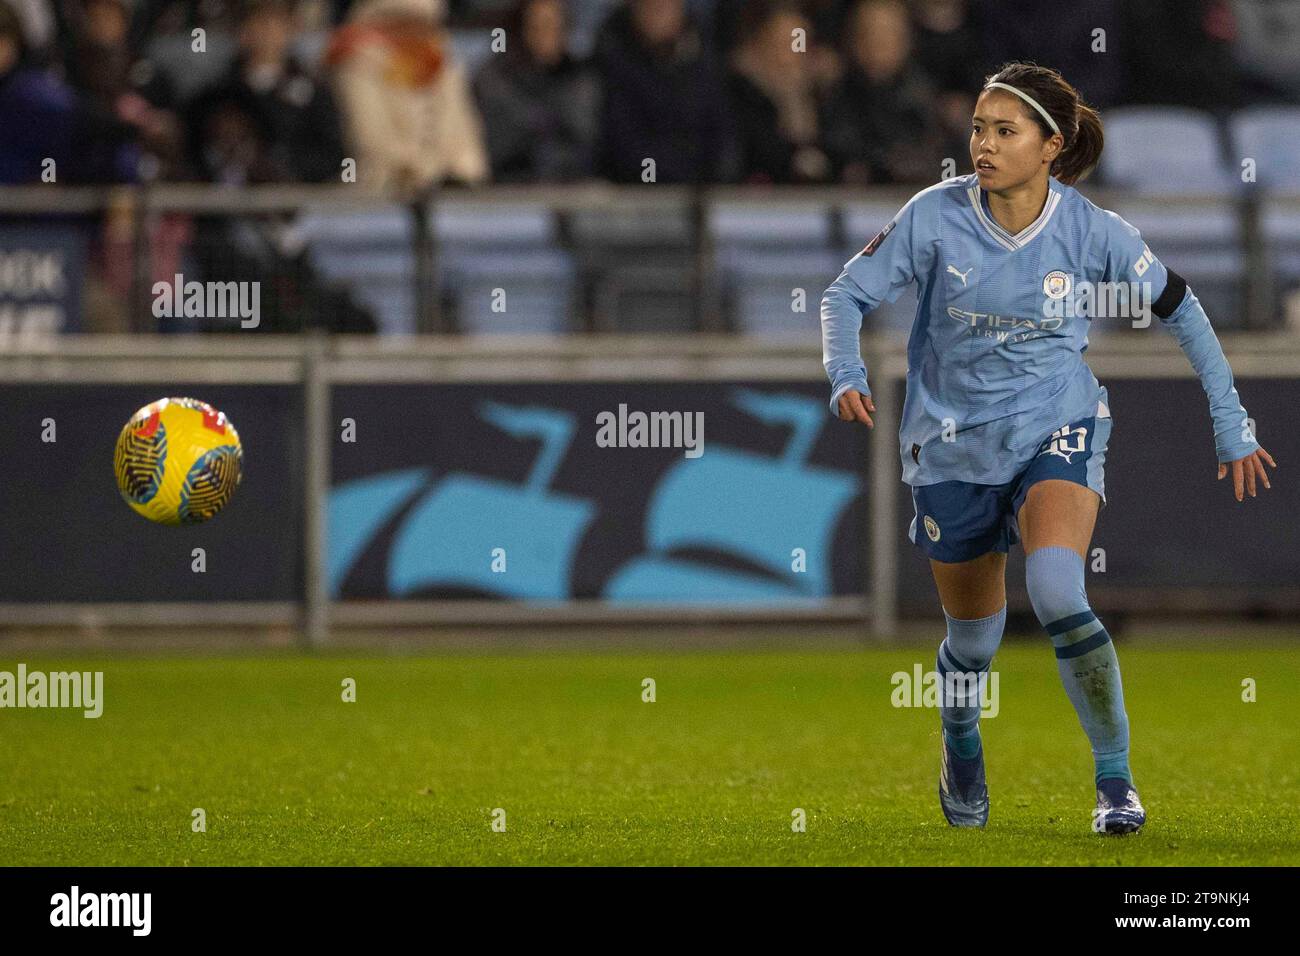 Manchester on Saturday 25th November 2023.Yui Hasegawa #25 of Manchester City during the Barclays FA Women's Super League match between Manchester City and Tottenham Hotspur at the Joie Stadium, Manchester on Saturday 25th November 2023. (Photo: Mike Morese | MI News) Credit: MI News & Sport /Alamy Live News Stock Photo